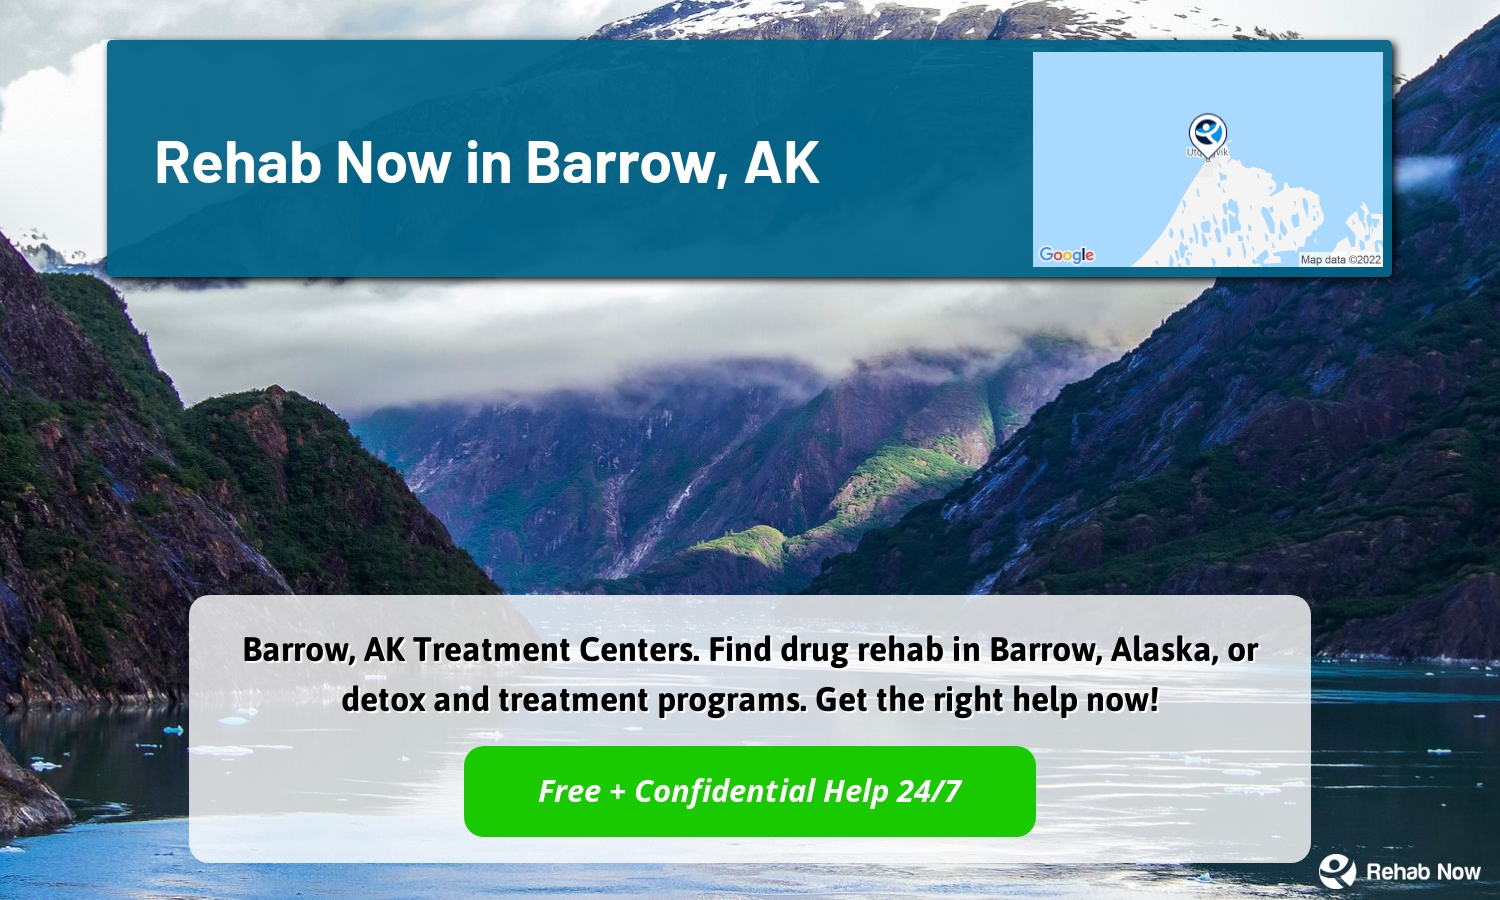 Barrow, AK Treatment Centers. Find drug rehab in Barrow, Alaska, or detox and treatment programs. Get the right help now!